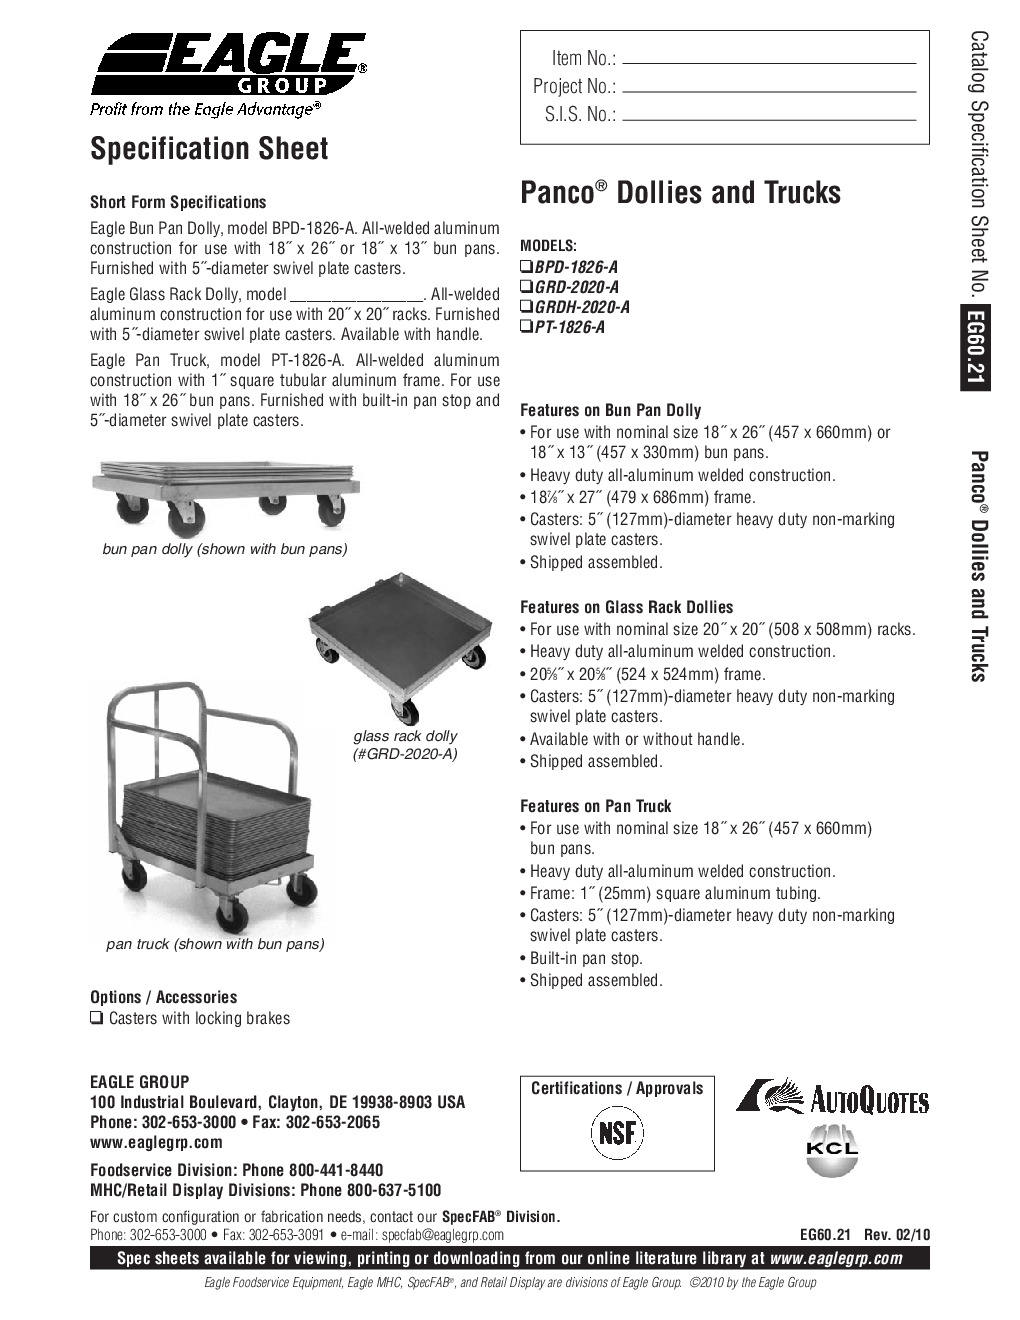 Eagle Group GRD-2020-A Dishwasher Rack Dolly